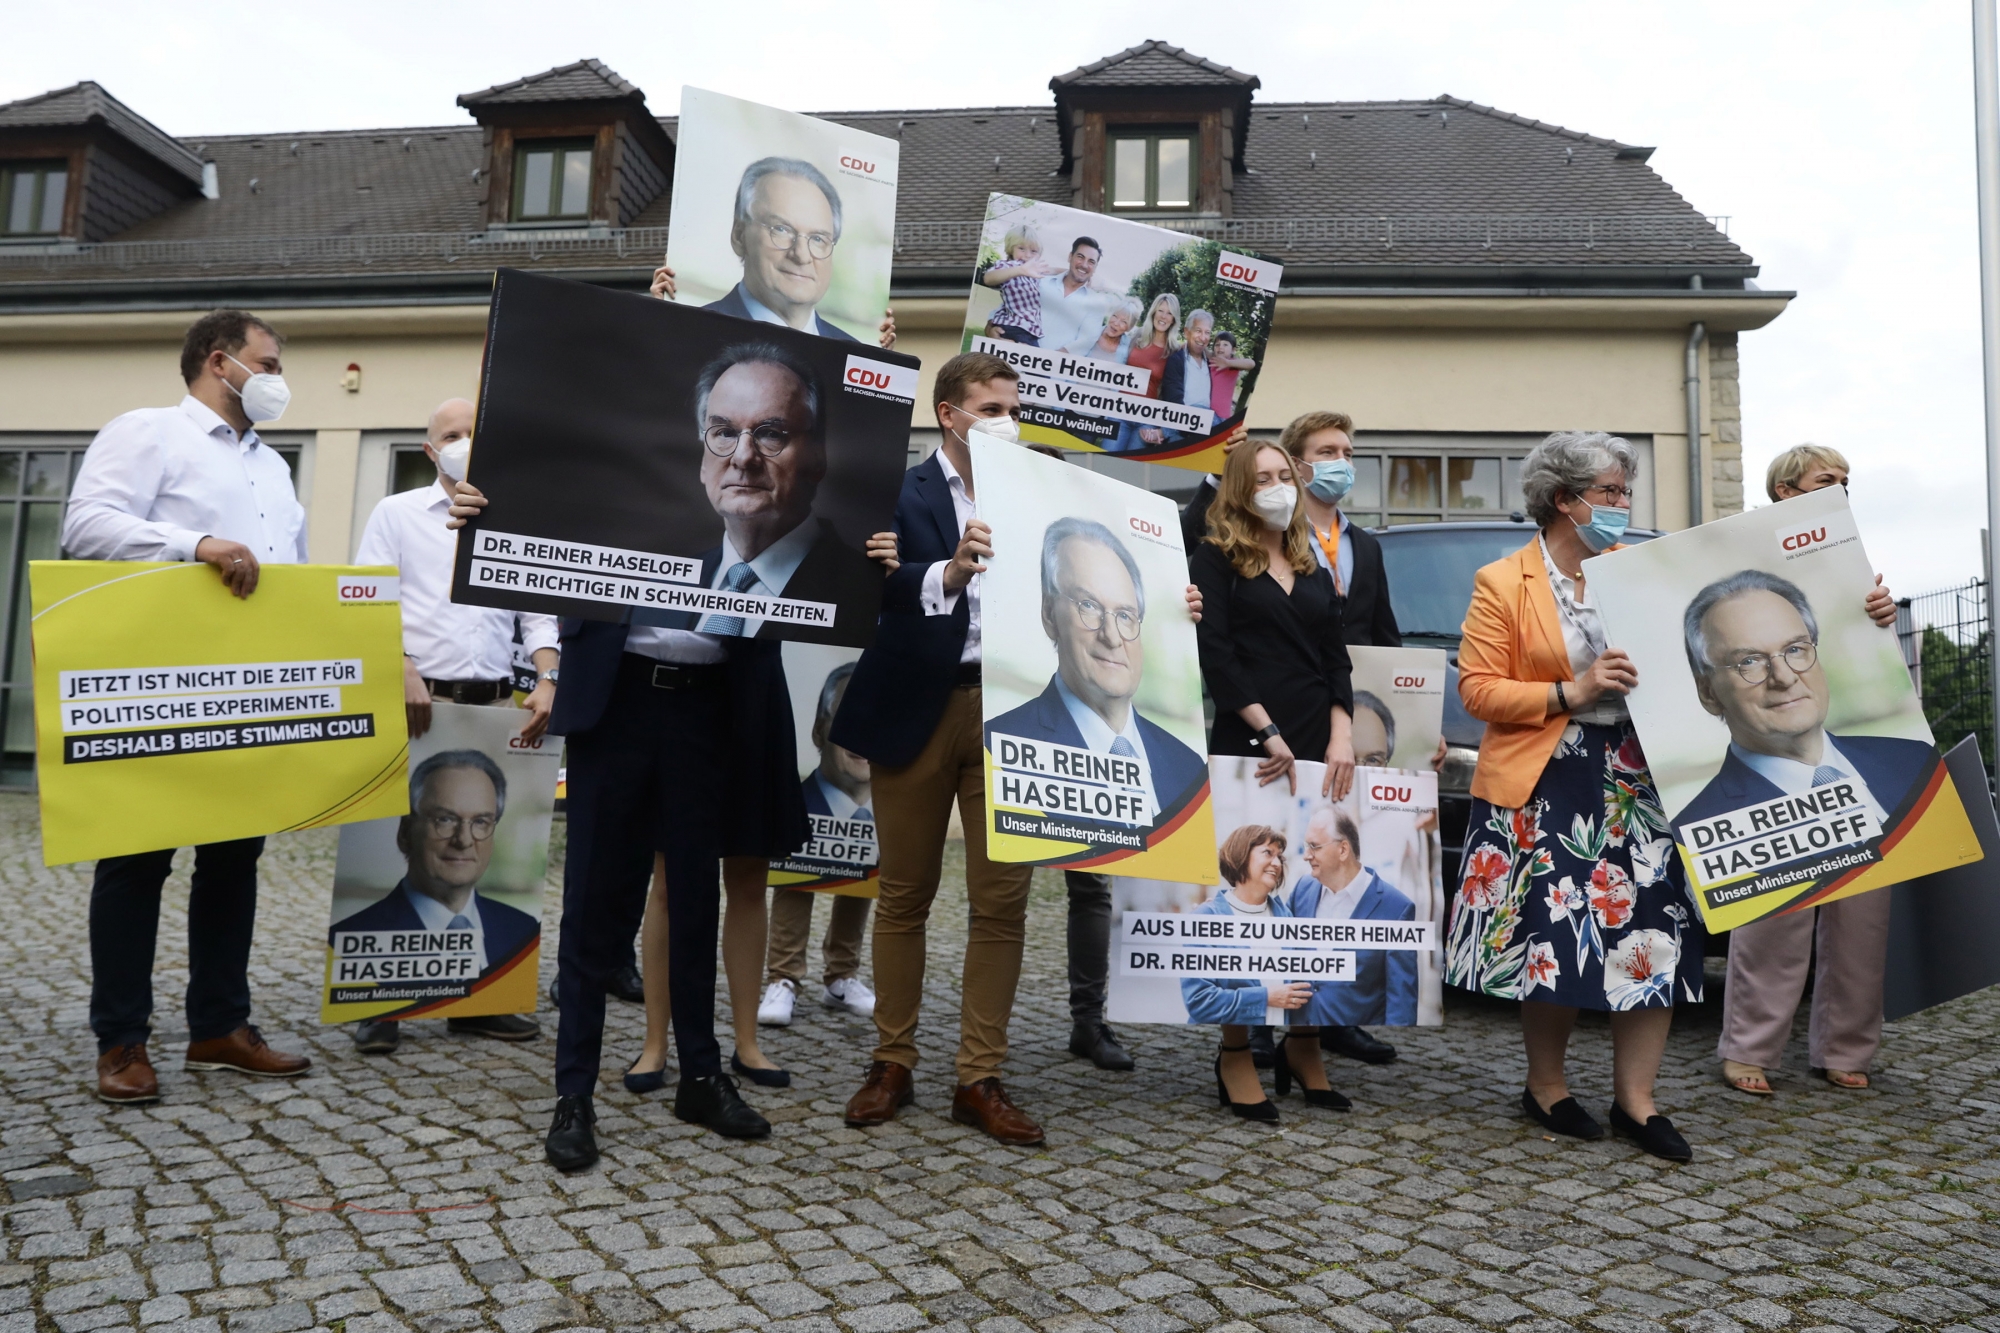 epa09251835 Supporters hold posters with the image of the leading candidate Reiner Haseloff at the election result party of the German Christian Democratic Party (CDU) following the Saxony-Anhalt state elections in Magdeburg, Germany, 06 June 2021. The regional election in Germany's federal state of Saxony-Anhalt is the last before general elections in September and is considered a trend indicator.  EPA/FILIP SINGER Le Nouvelliste